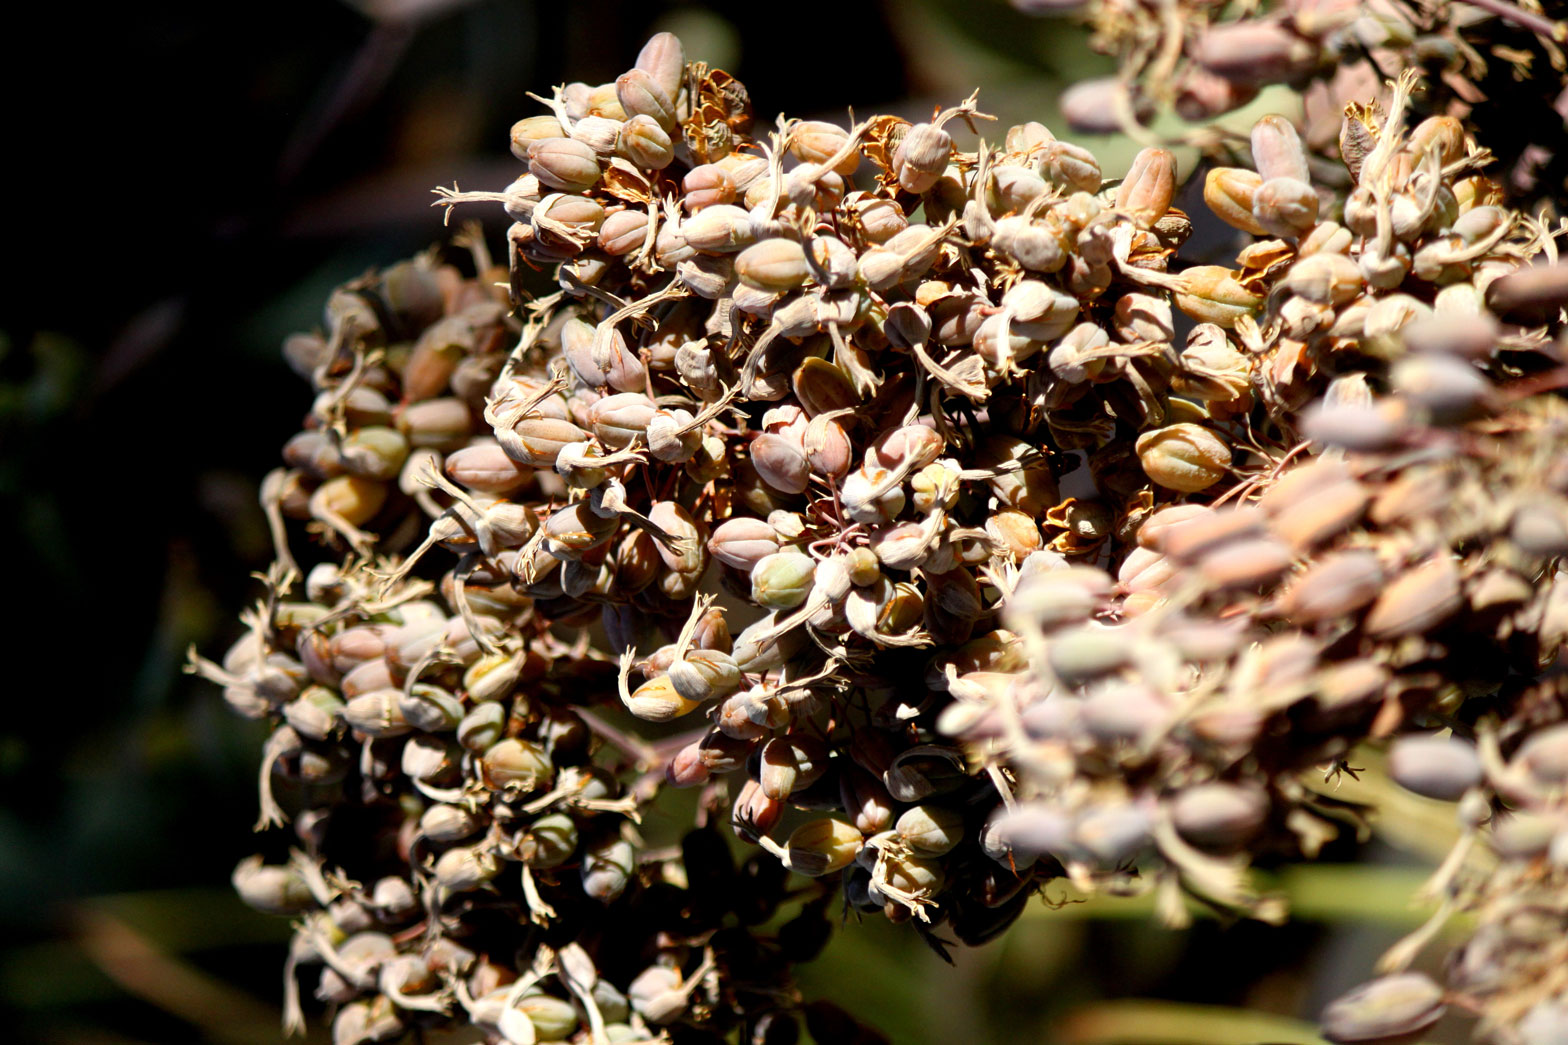 Clusters of Texas Bear Grass seed clusters.